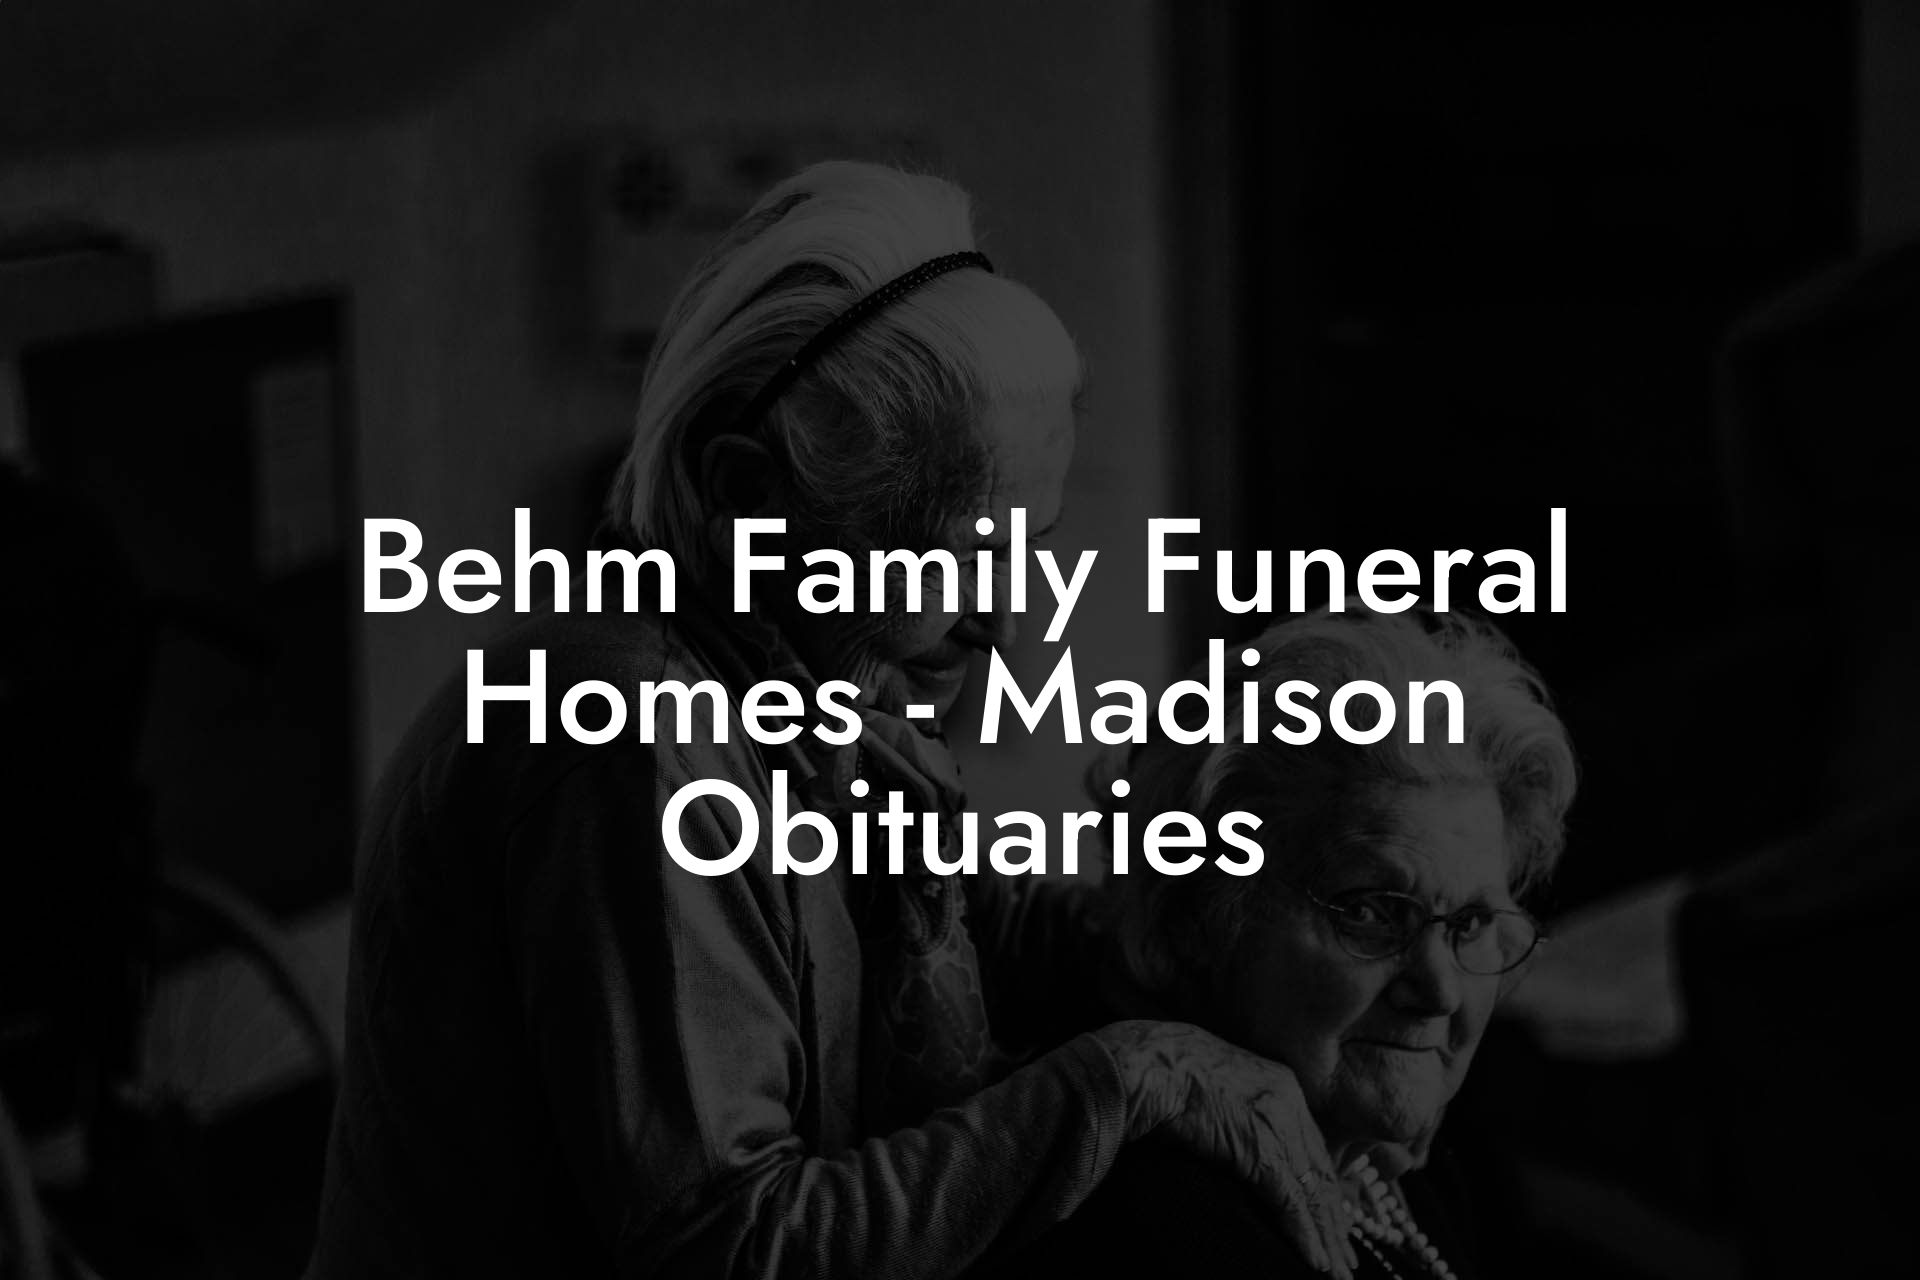 Behm Family Funeral Homes - Madison Obituaries